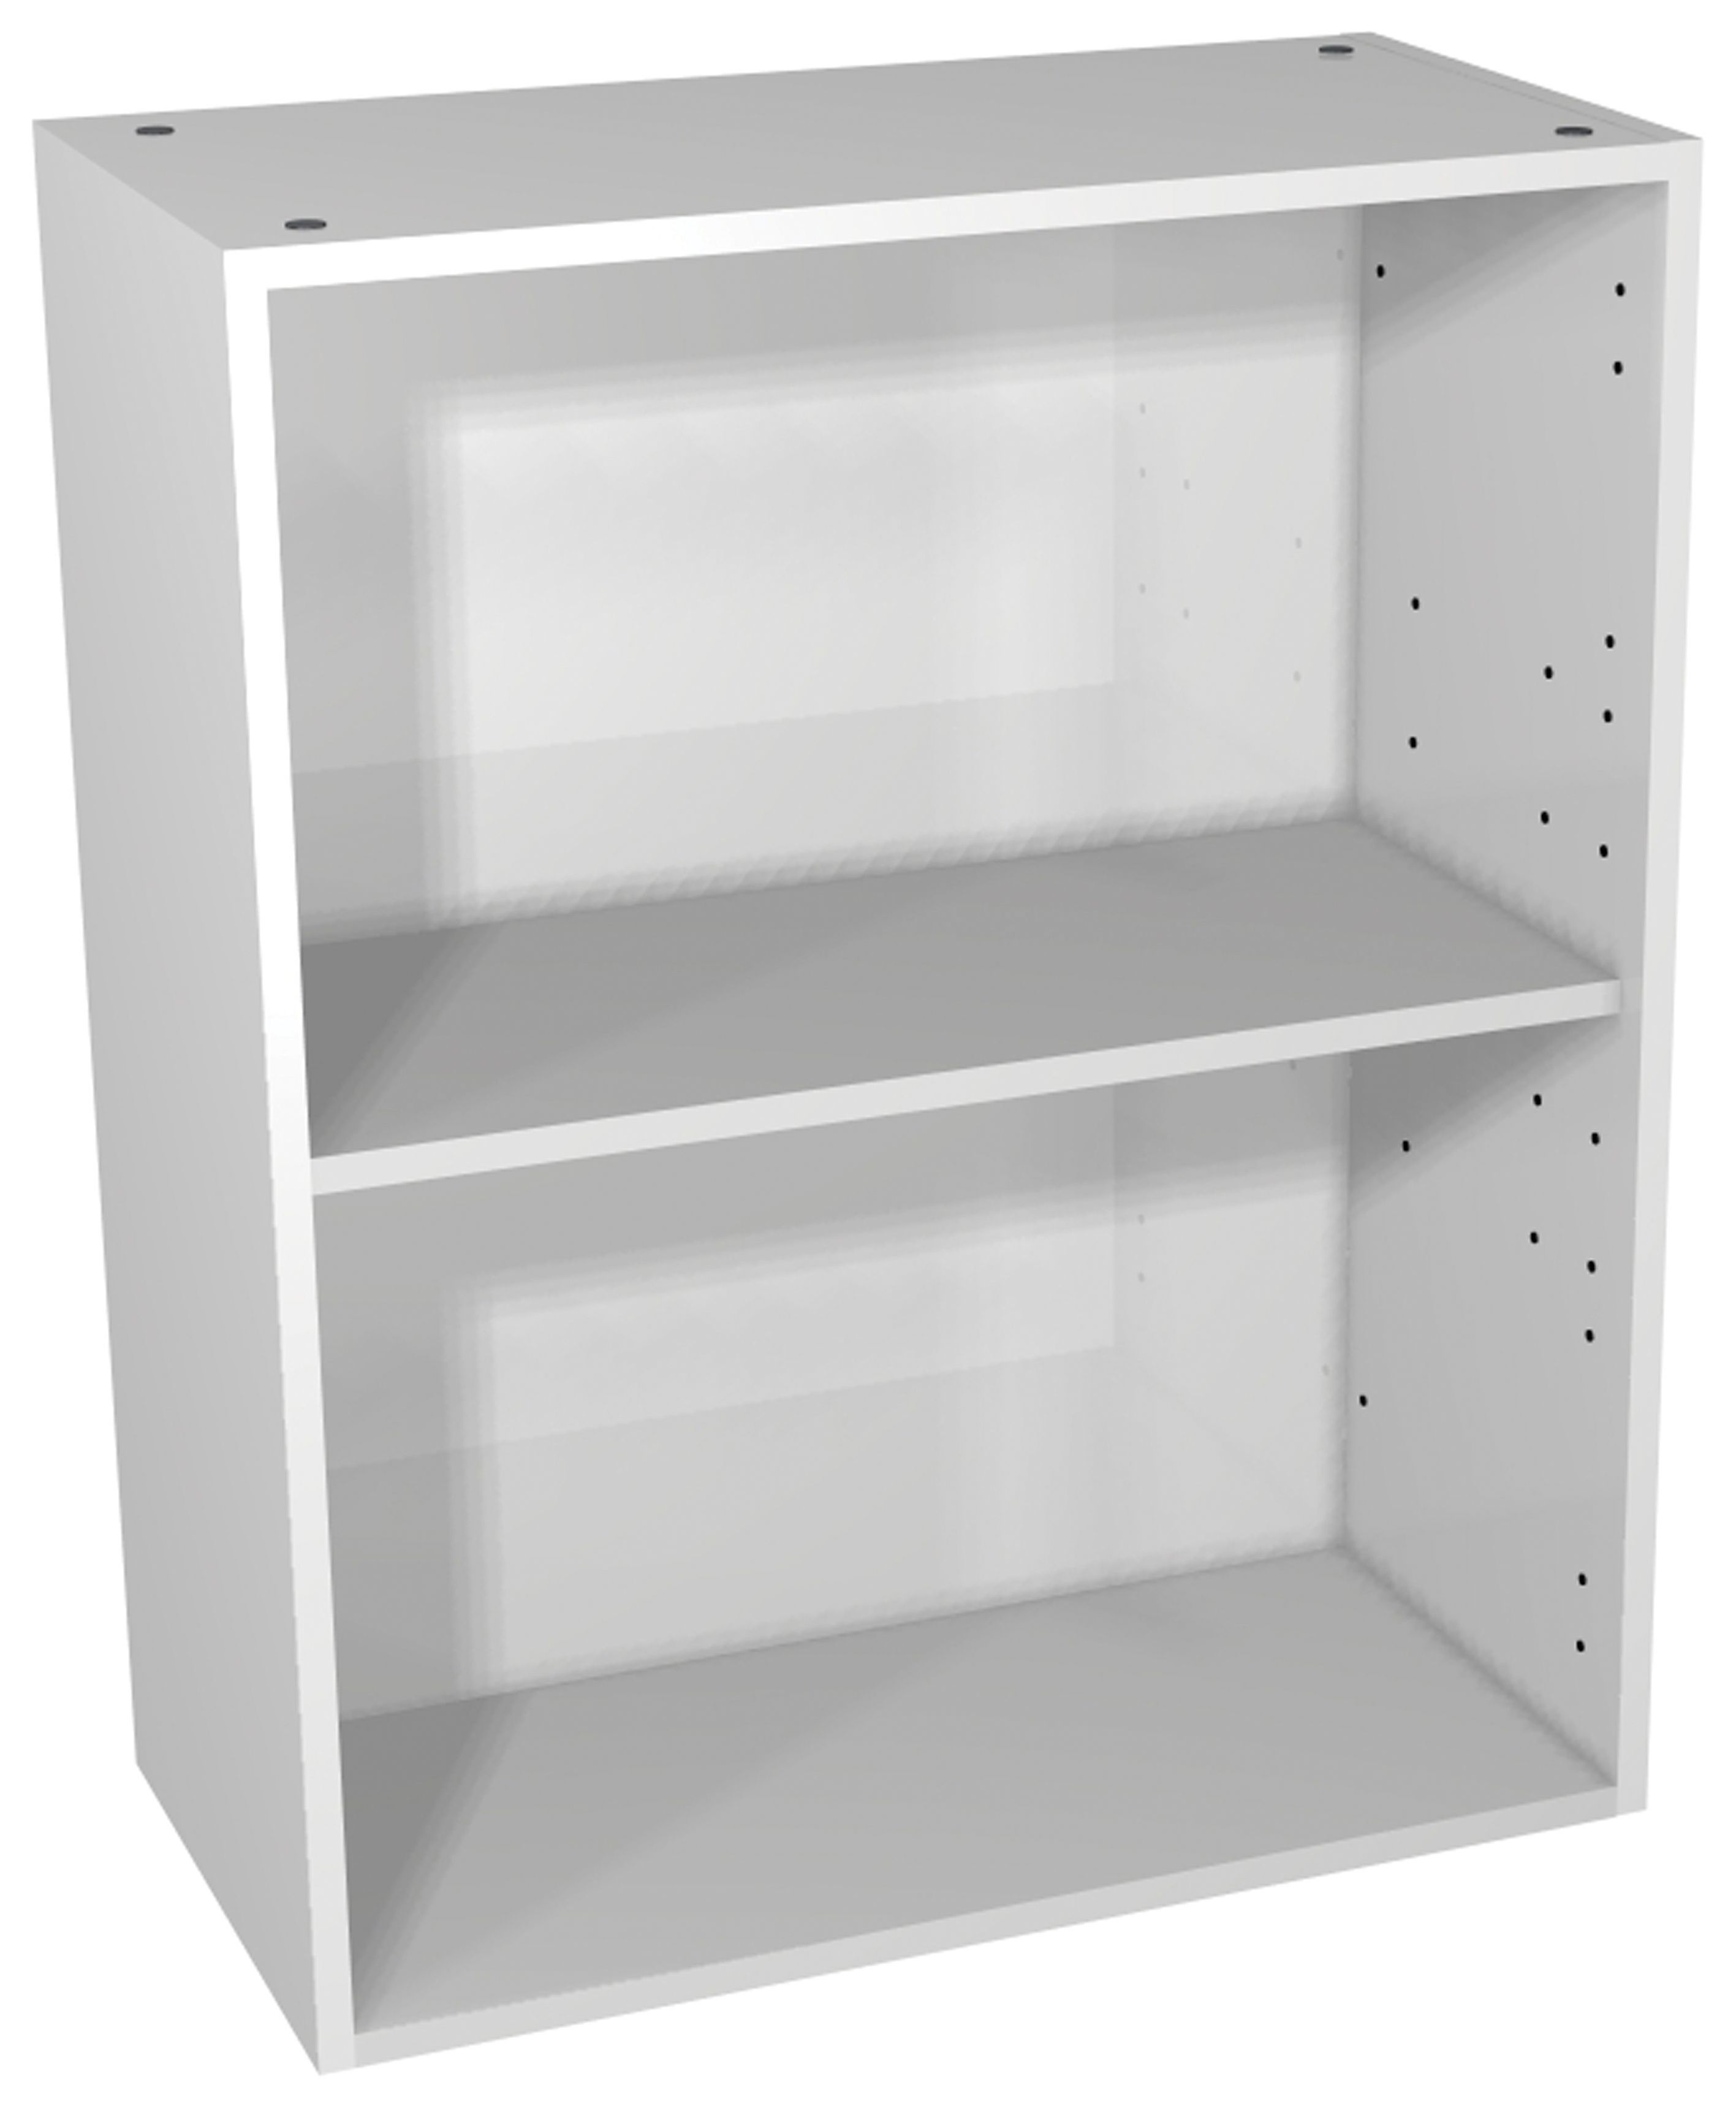 Image of Wickes Vermont Grey Open Display Unit - 600 x 735mm